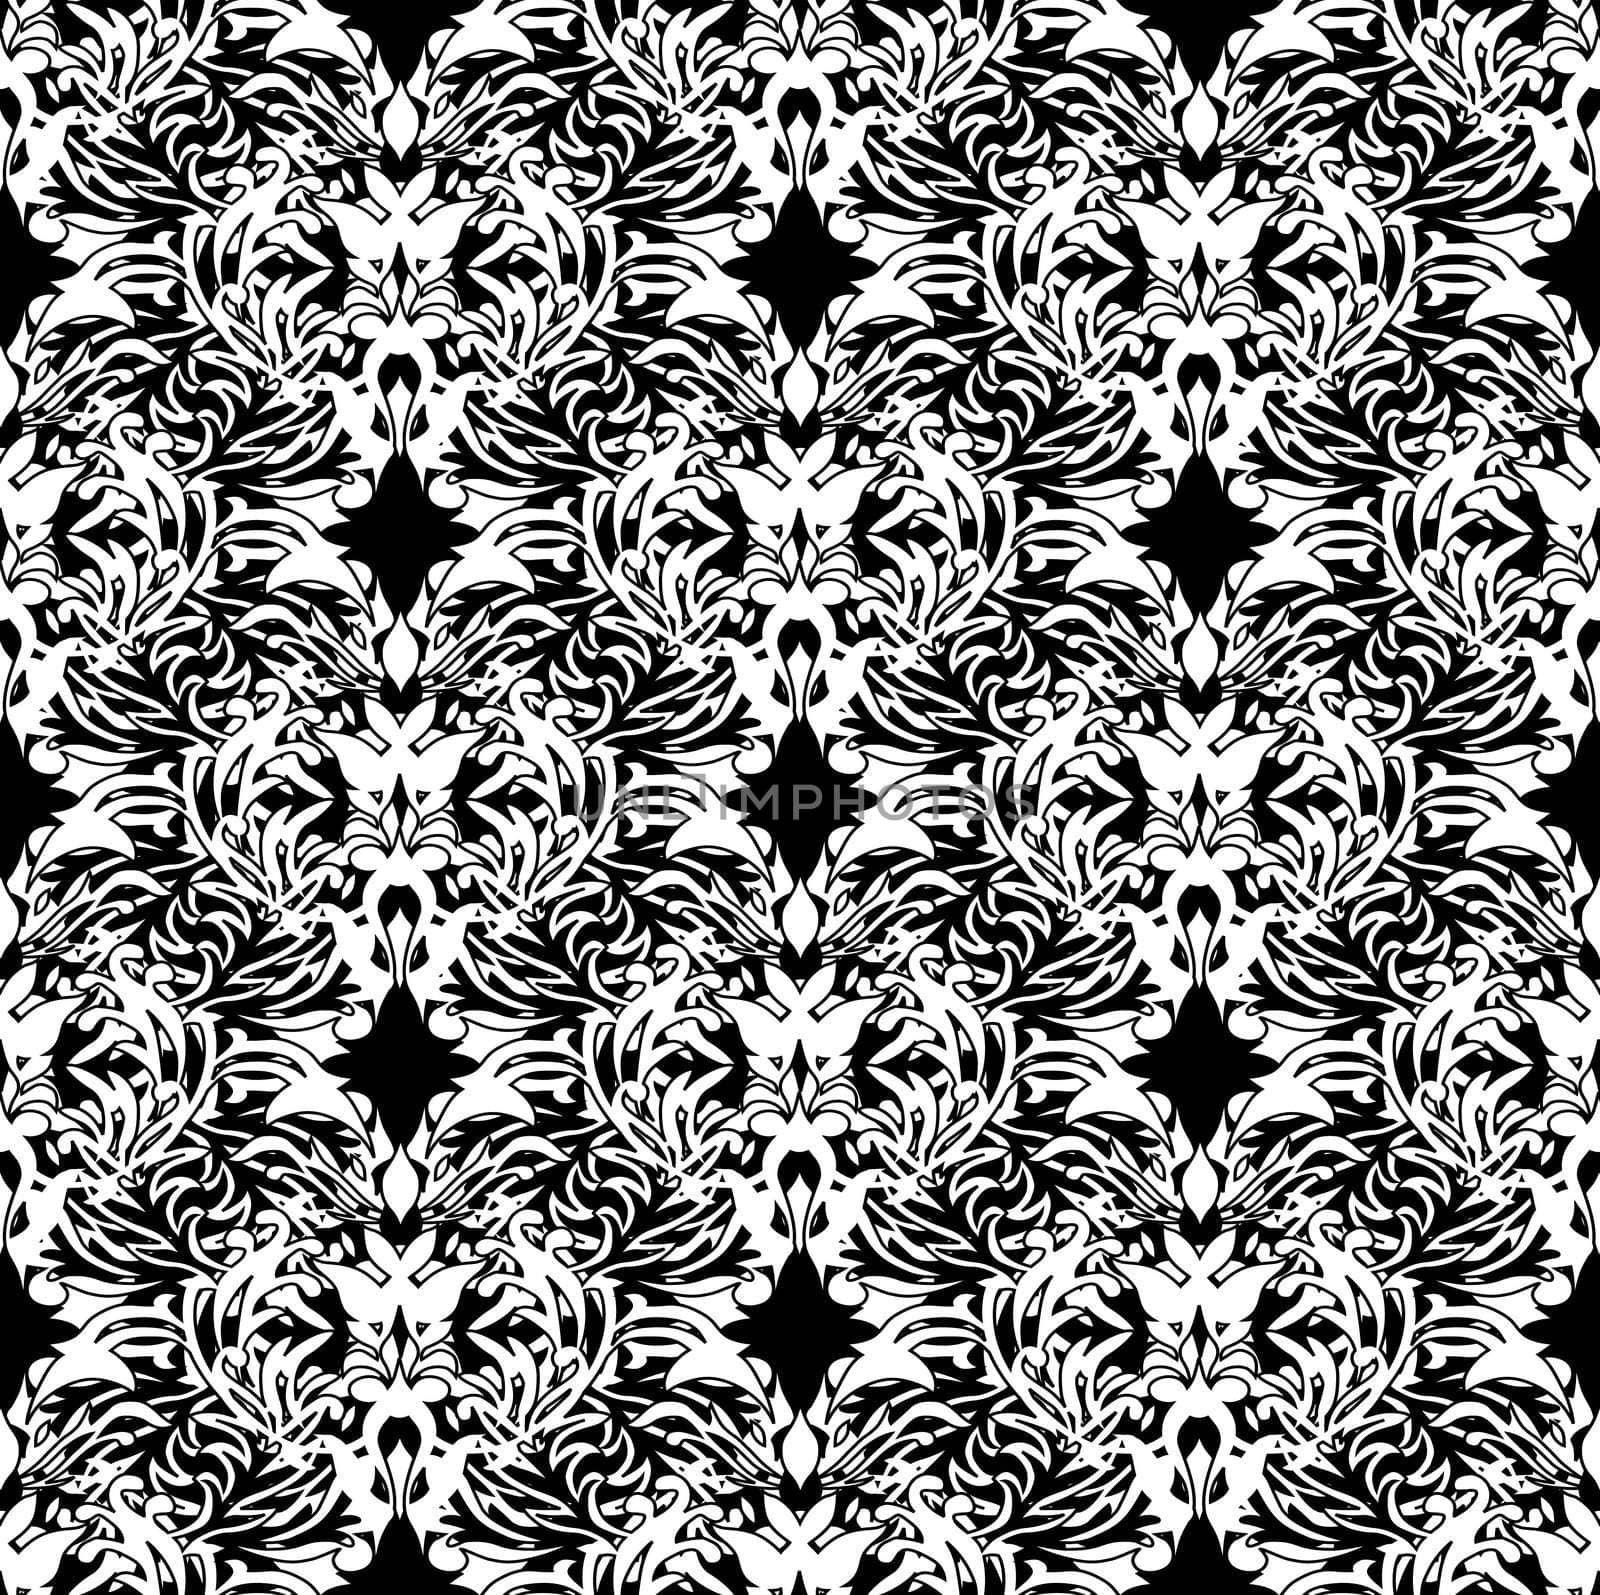 white and black pen and ink floral design ideal background